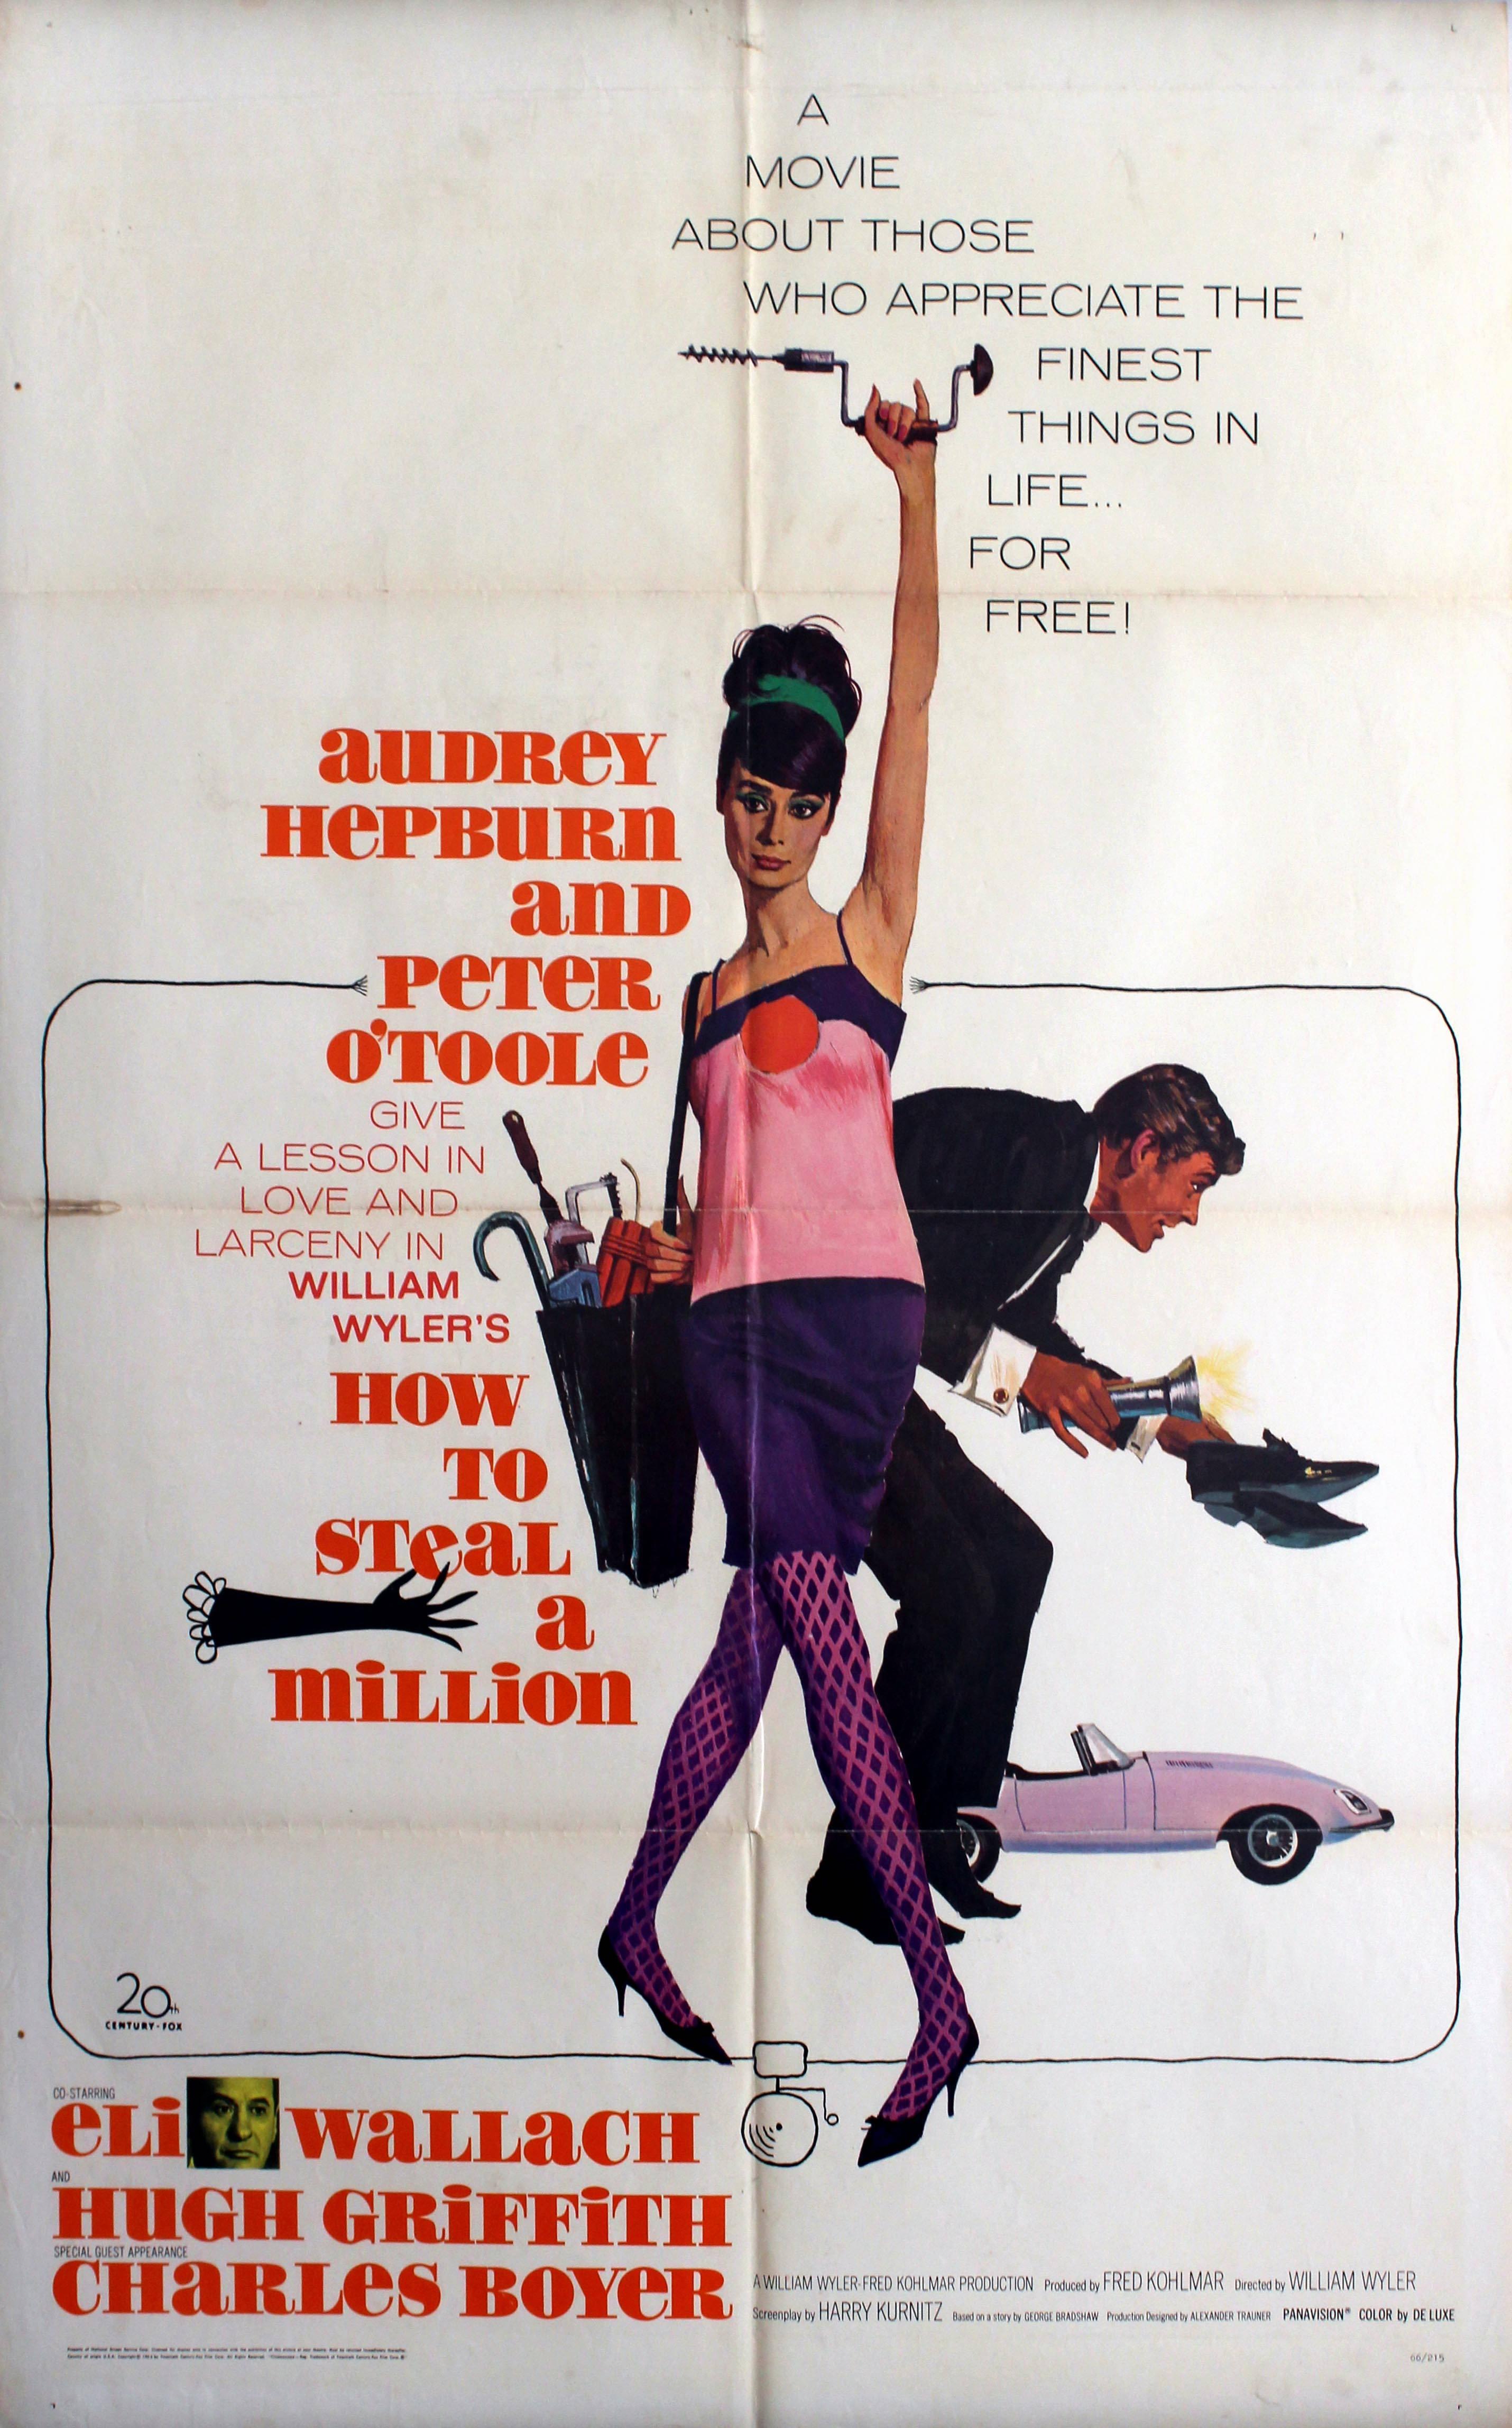 Robert E. McGinnis Print - Original 1966 Movie Poster For How To Steal A Million Starring Audrey Hepburn